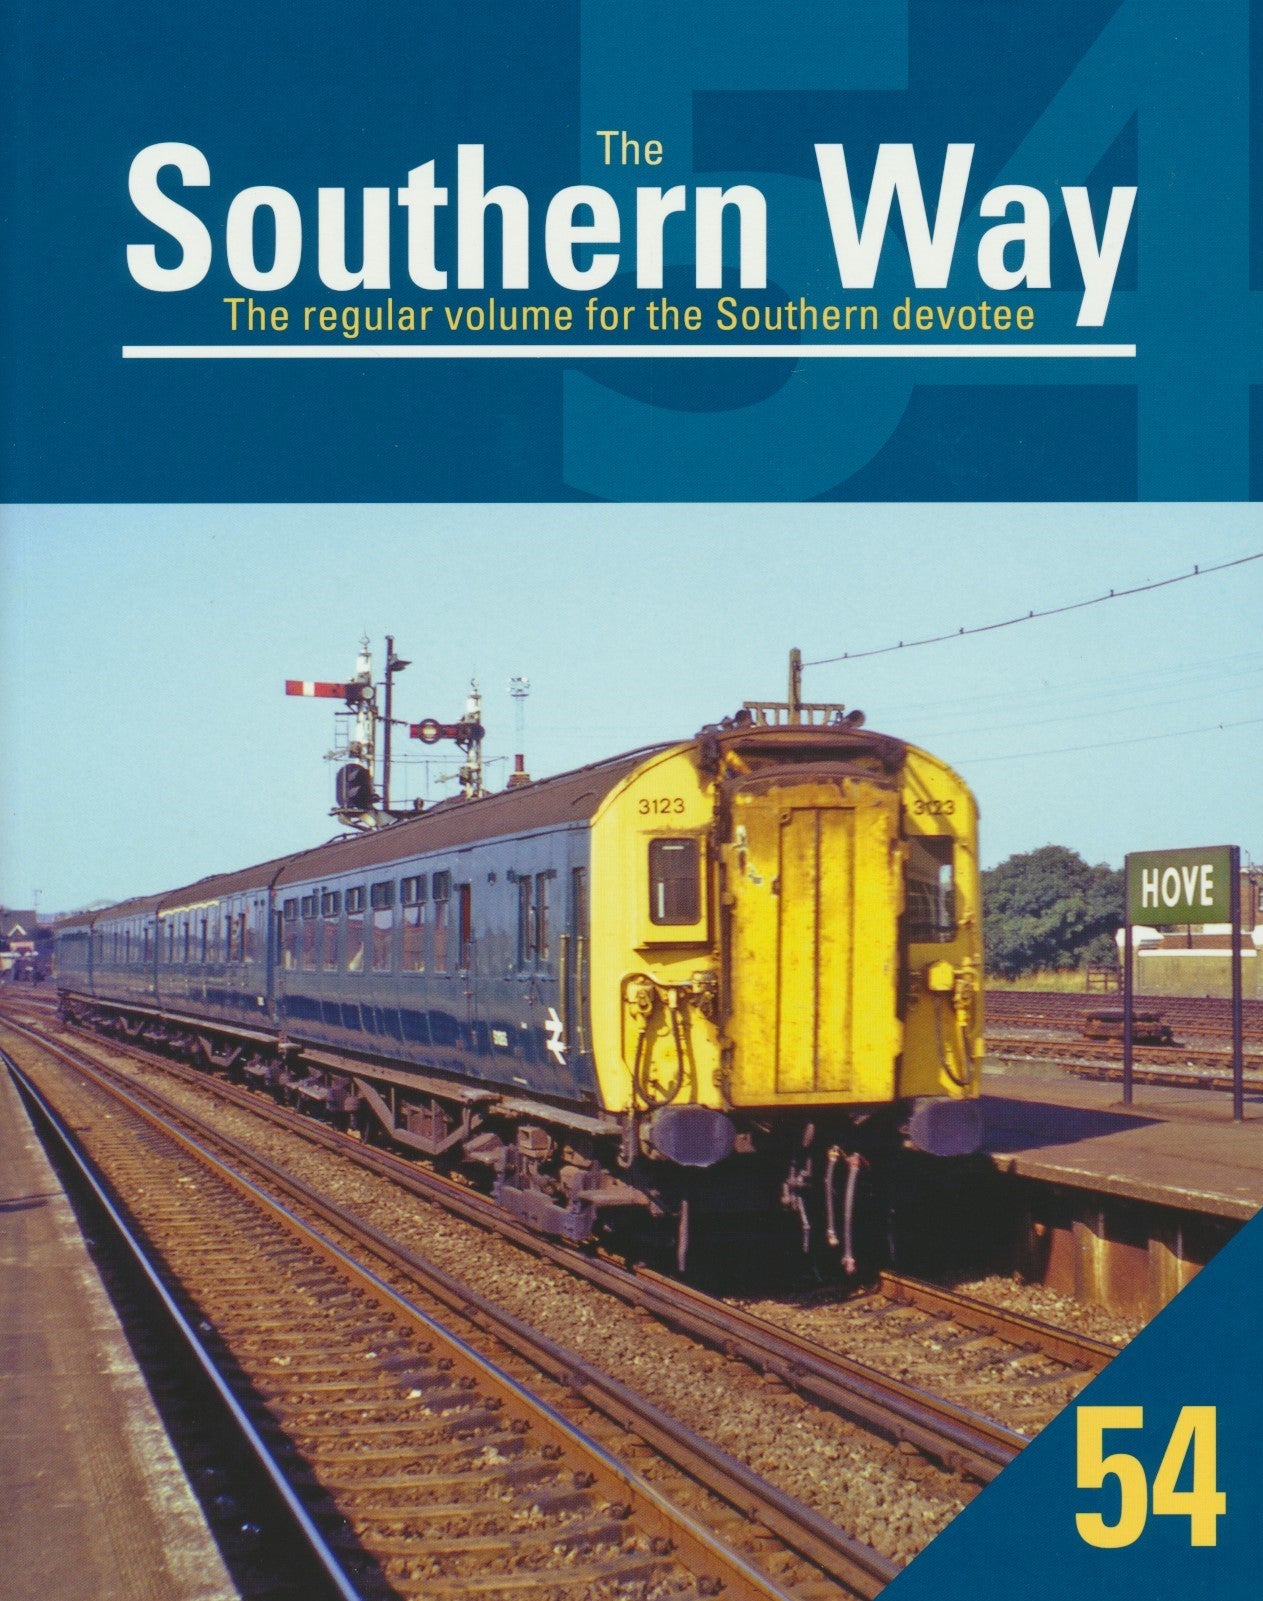 The Southern Way - Issue 54